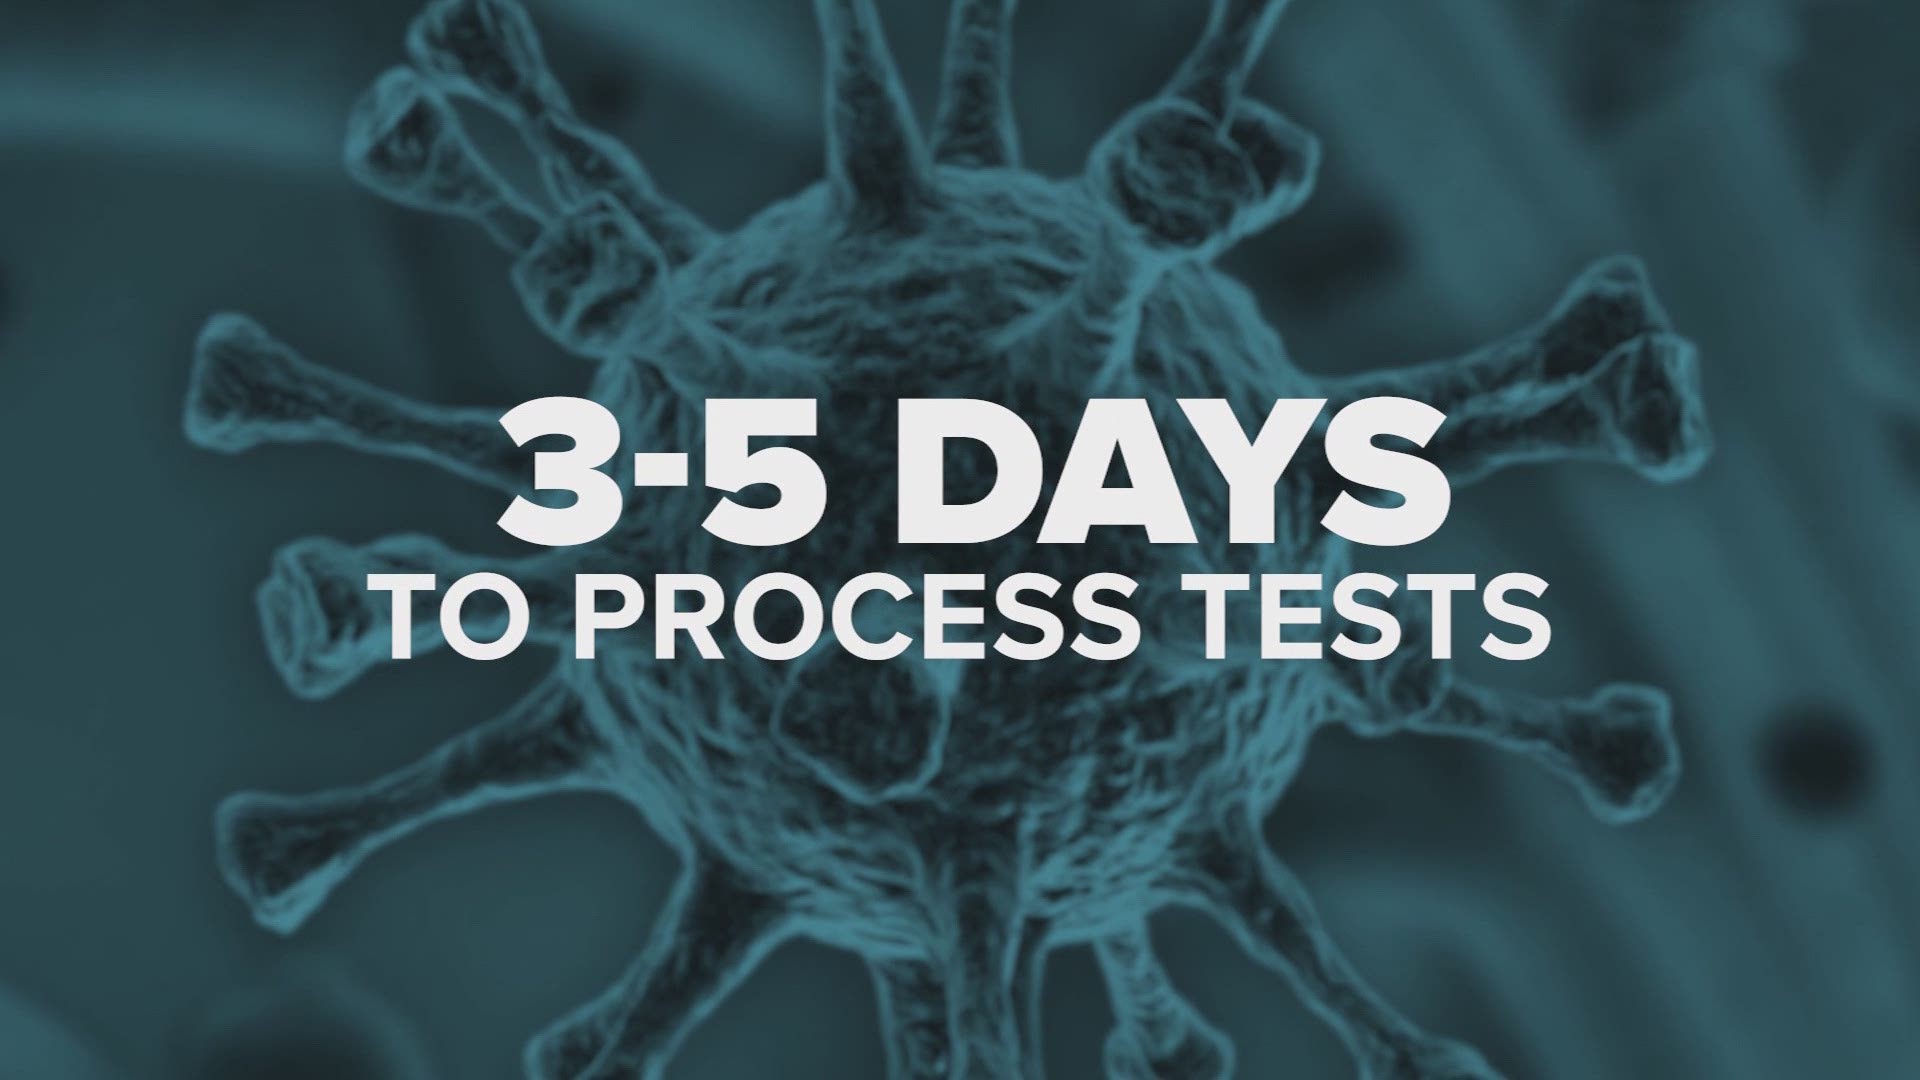 One question we keep hearing is: How long does it take for test results to come in? We took your questions to the experts.